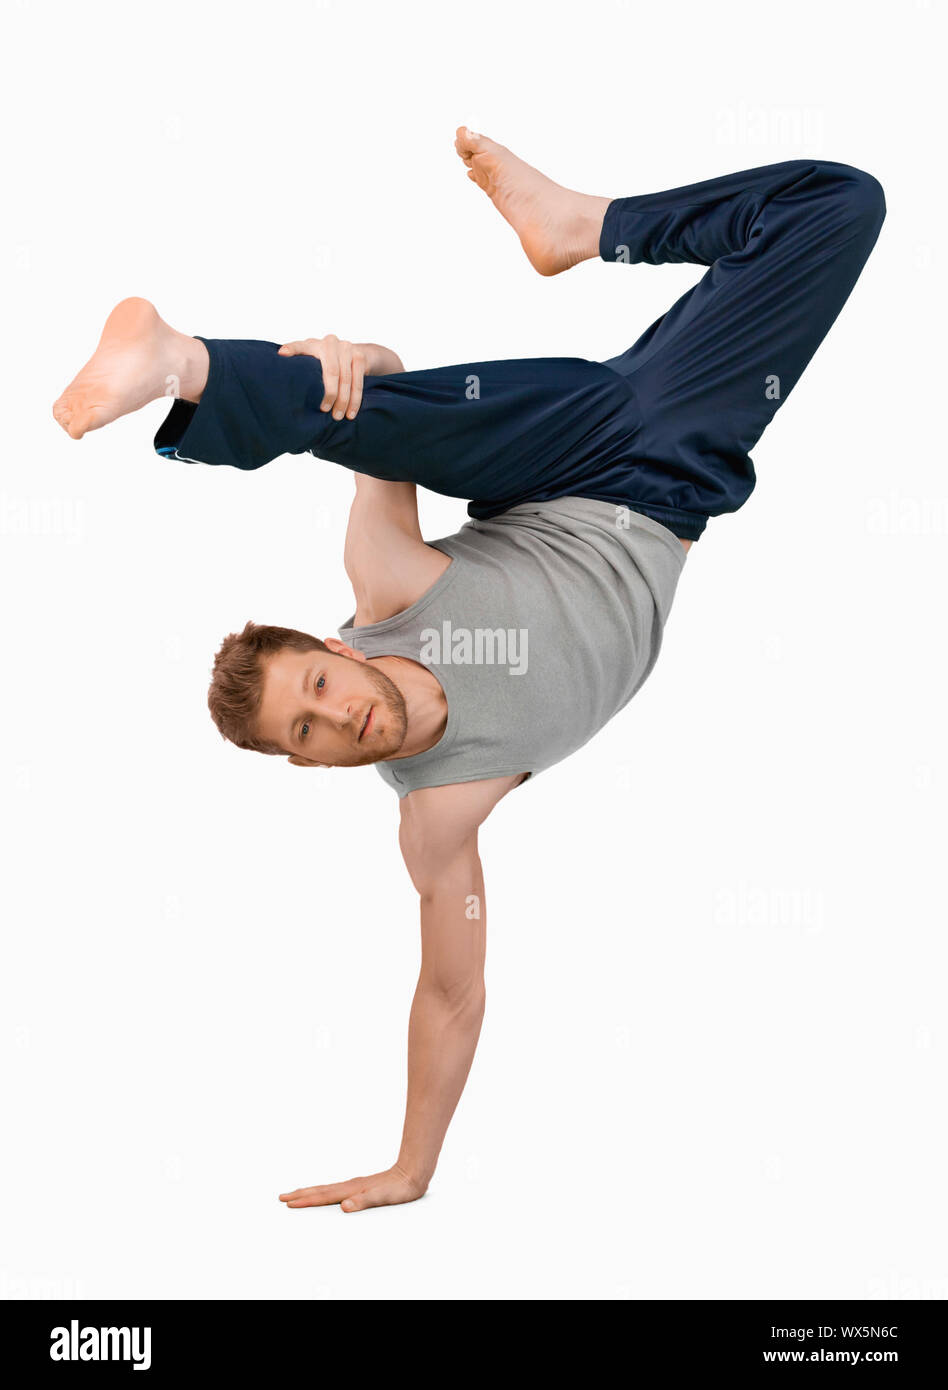 Break dancer doing an one handed handstand against a white background Stock Photo